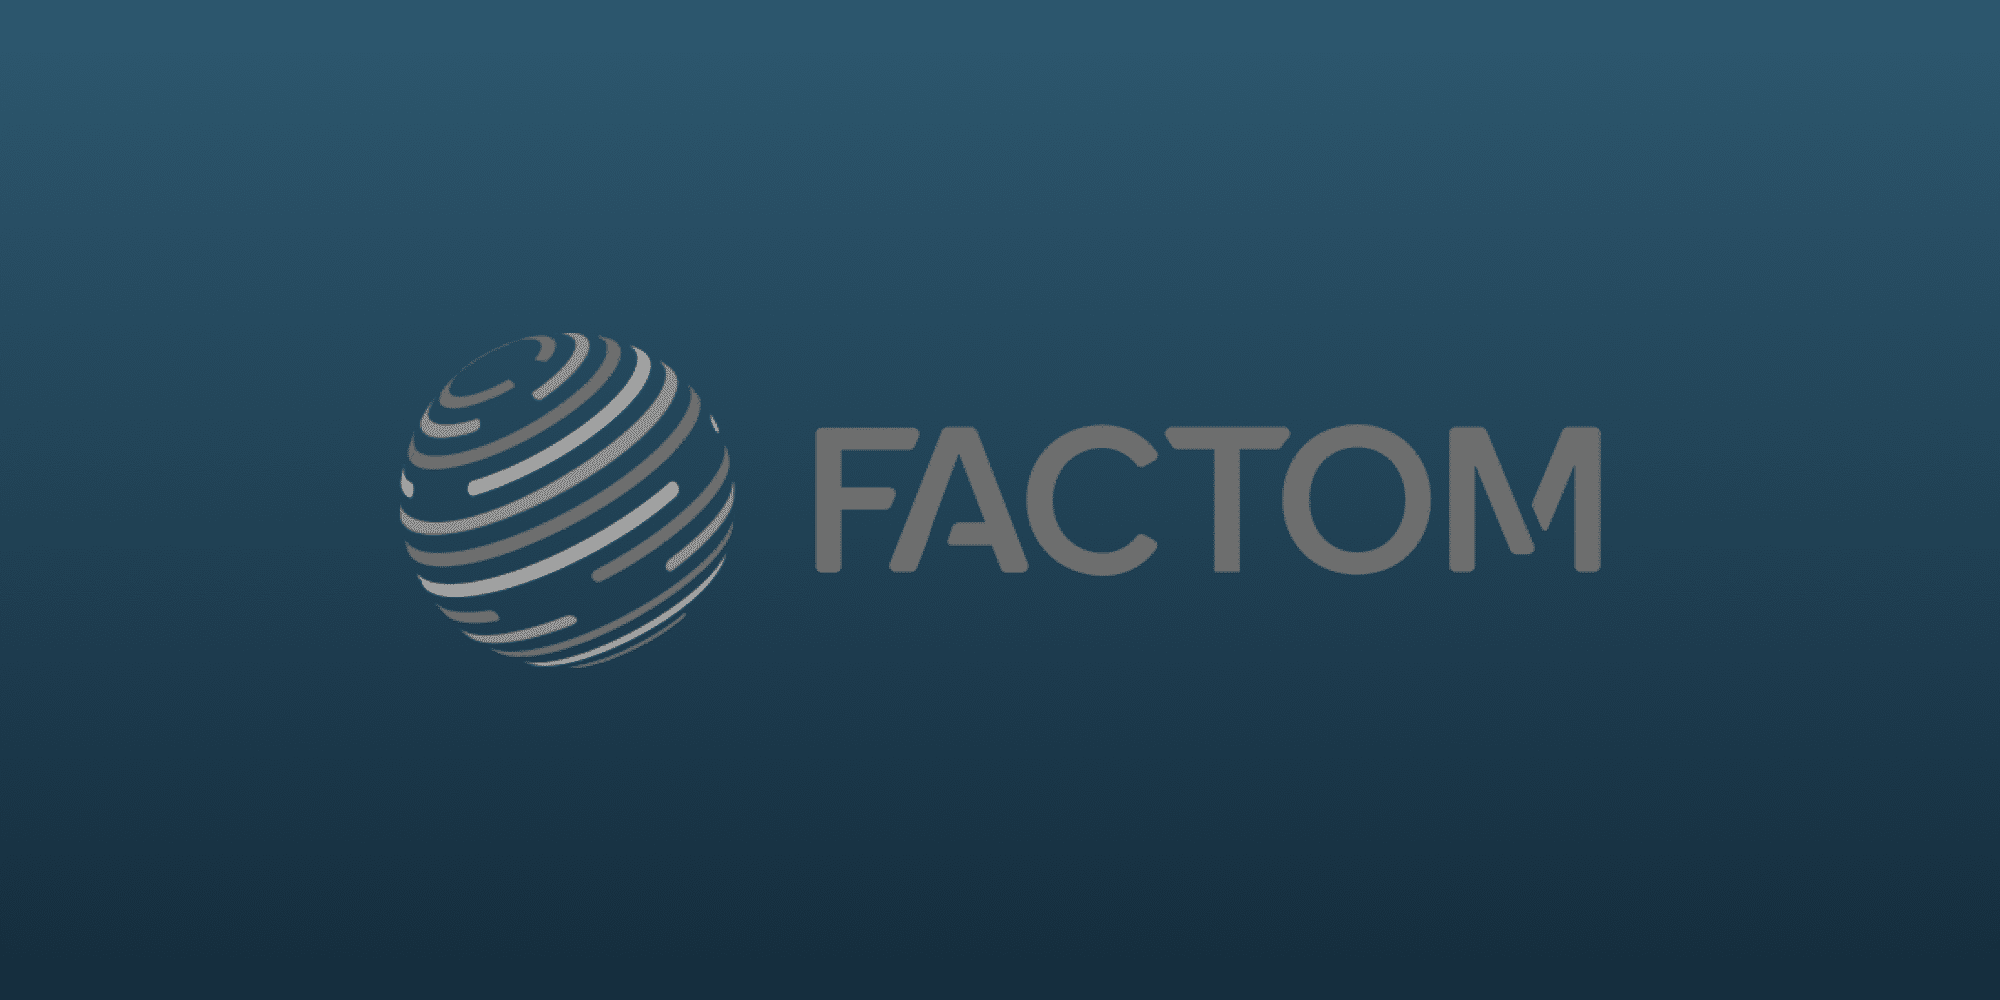 Buy Factom with Credit or Debit Card | Buy FCT Instantly